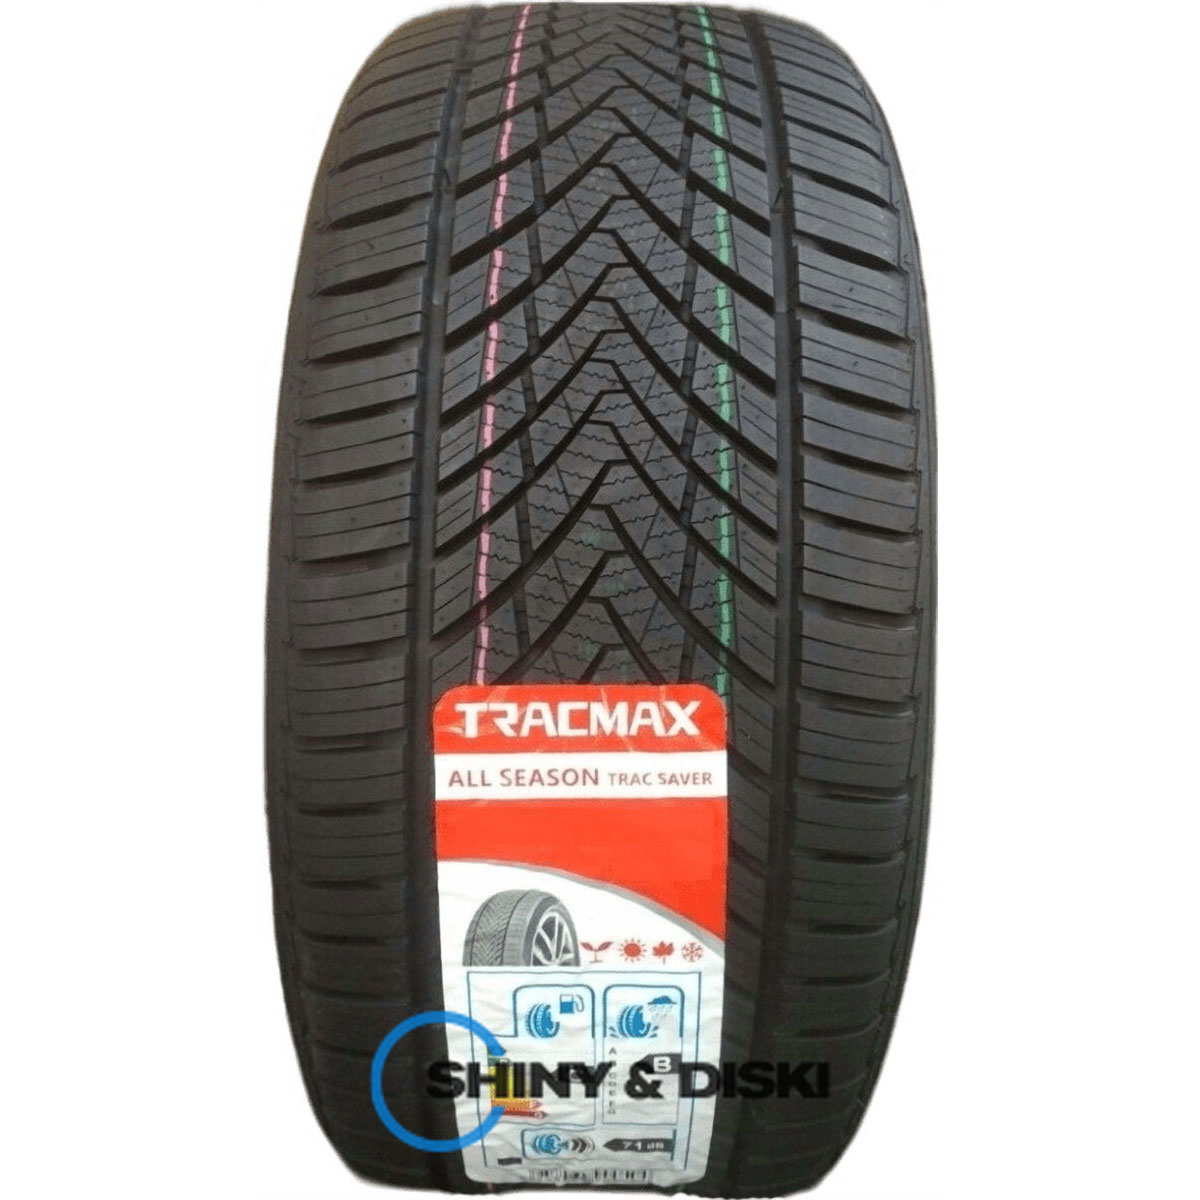 покрышки tracmax a/s trac saver 165/70 r14 85t